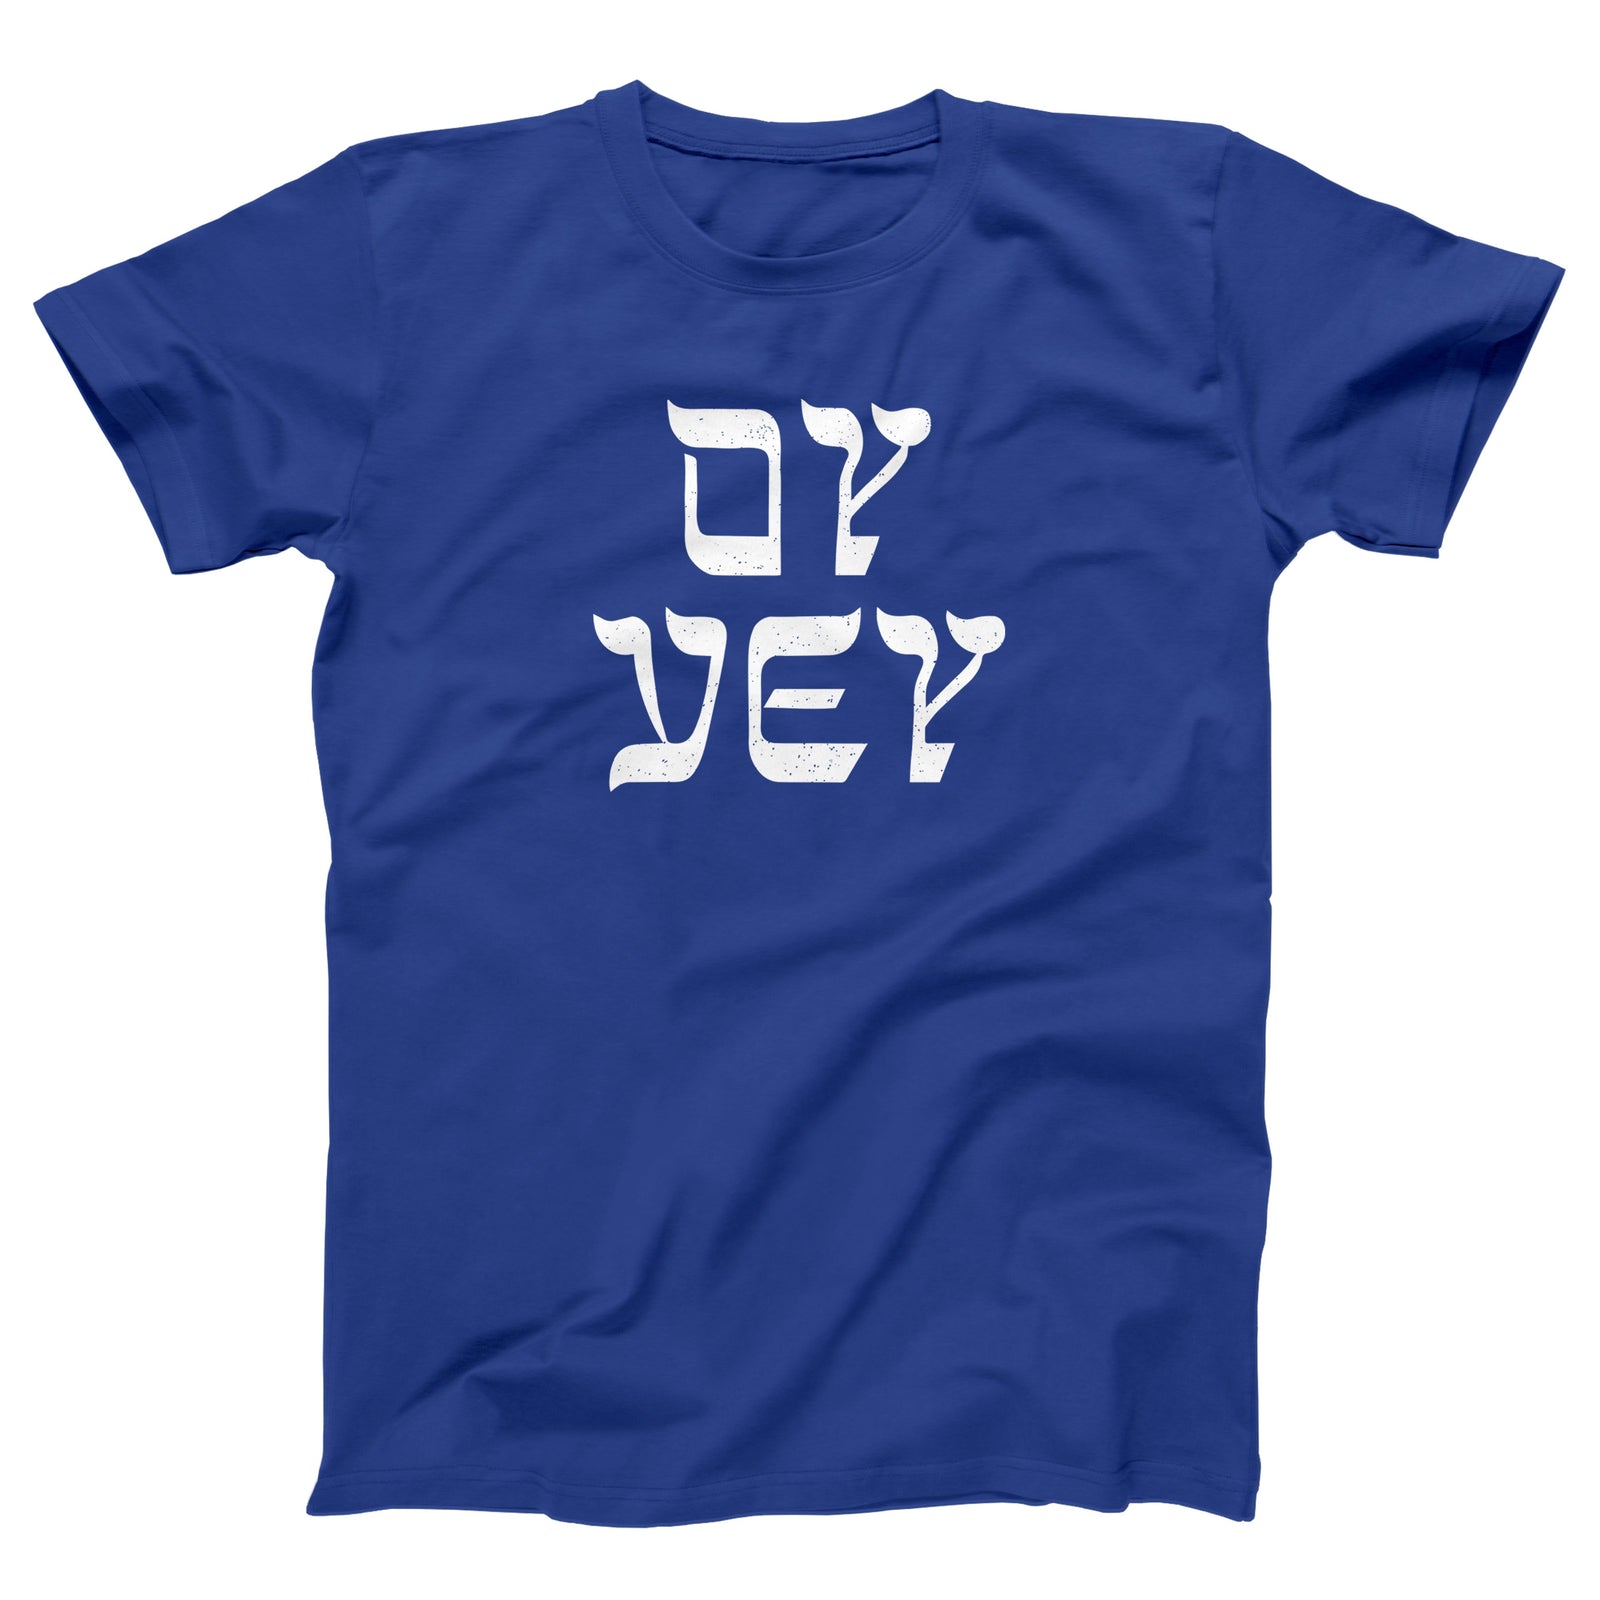 //cdn.shopify.com/s/files/1/0274/2488/2766/products/oy-vey-menunisex-t-shirt-390603_5000x.jpg?v=1605736318 5000w,
    //cdn.shopify.com/s/files/1/0274/2488/2766/products/oy-vey-menunisex-t-shirt-390603_4500x.jpg?v=1605736318 4500w,
    //cdn.shopify.com/s/files/1/0274/2488/2766/products/oy-vey-menunisex-t-shirt-390603_4000x.jpg?v=1605736318 4000w,
    //cdn.shopify.com/s/files/1/0274/2488/2766/products/oy-vey-menunisex-t-shirt-390603_3500x.jpg?v=1605736318 3500w,
    //cdn.shopify.com/s/files/1/0274/2488/2766/products/oy-vey-menunisex-t-shirt-390603_3000x.jpg?v=1605736318 3000w,
    //cdn.shopify.com/s/files/1/0274/2488/2766/products/oy-vey-menunisex-t-shirt-390603_2500x.jpg?v=1605736318 2500w,
    //cdn.shopify.com/s/files/1/0274/2488/2766/products/oy-vey-menunisex-t-shirt-390603_2000x.jpg?v=1605736318 2000w,
    //cdn.shopify.com/s/files/1/0274/2488/2766/products/oy-vey-menunisex-t-shirt-390603_1800x.jpg?v=1605736318 1800w,
    //cdn.shopify.com/s/files/1/0274/2488/2766/products/oy-vey-menunisex-t-shirt-390603_1600x.jpg?v=1605736318 1600w,
    //cdn.shopify.com/s/files/1/0274/2488/2766/products/oy-vey-menunisex-t-shirt-390603_1400x.jpg?v=1605736318 1400w,
    //cdn.shopify.com/s/files/1/0274/2488/2766/products/oy-vey-menunisex-t-shirt-390603_1200x.jpg?v=1605736318 1200w,
    //cdn.shopify.com/s/files/1/0274/2488/2766/products/oy-vey-menunisex-t-shirt-390603_1000x.jpg?v=1605736318 1000w,
    //cdn.shopify.com/s/files/1/0274/2488/2766/products/oy-vey-menunisex-t-shirt-390603_800x.jpg?v=1605736318 800w,
    //cdn.shopify.com/s/files/1/0274/2488/2766/products/oy-vey-menunisex-t-shirt-390603_600x.jpg?v=1605736318 600w,
    //cdn.shopify.com/s/files/1/0274/2488/2766/products/oy-vey-menunisex-t-shirt-390603_400x.jpg?v=1605736318 400w,
    //cdn.shopify.com/s/files/1/0274/2488/2766/products/oy-vey-menunisex-t-shirt-390603_200x.jpg?v=1605736318 200w